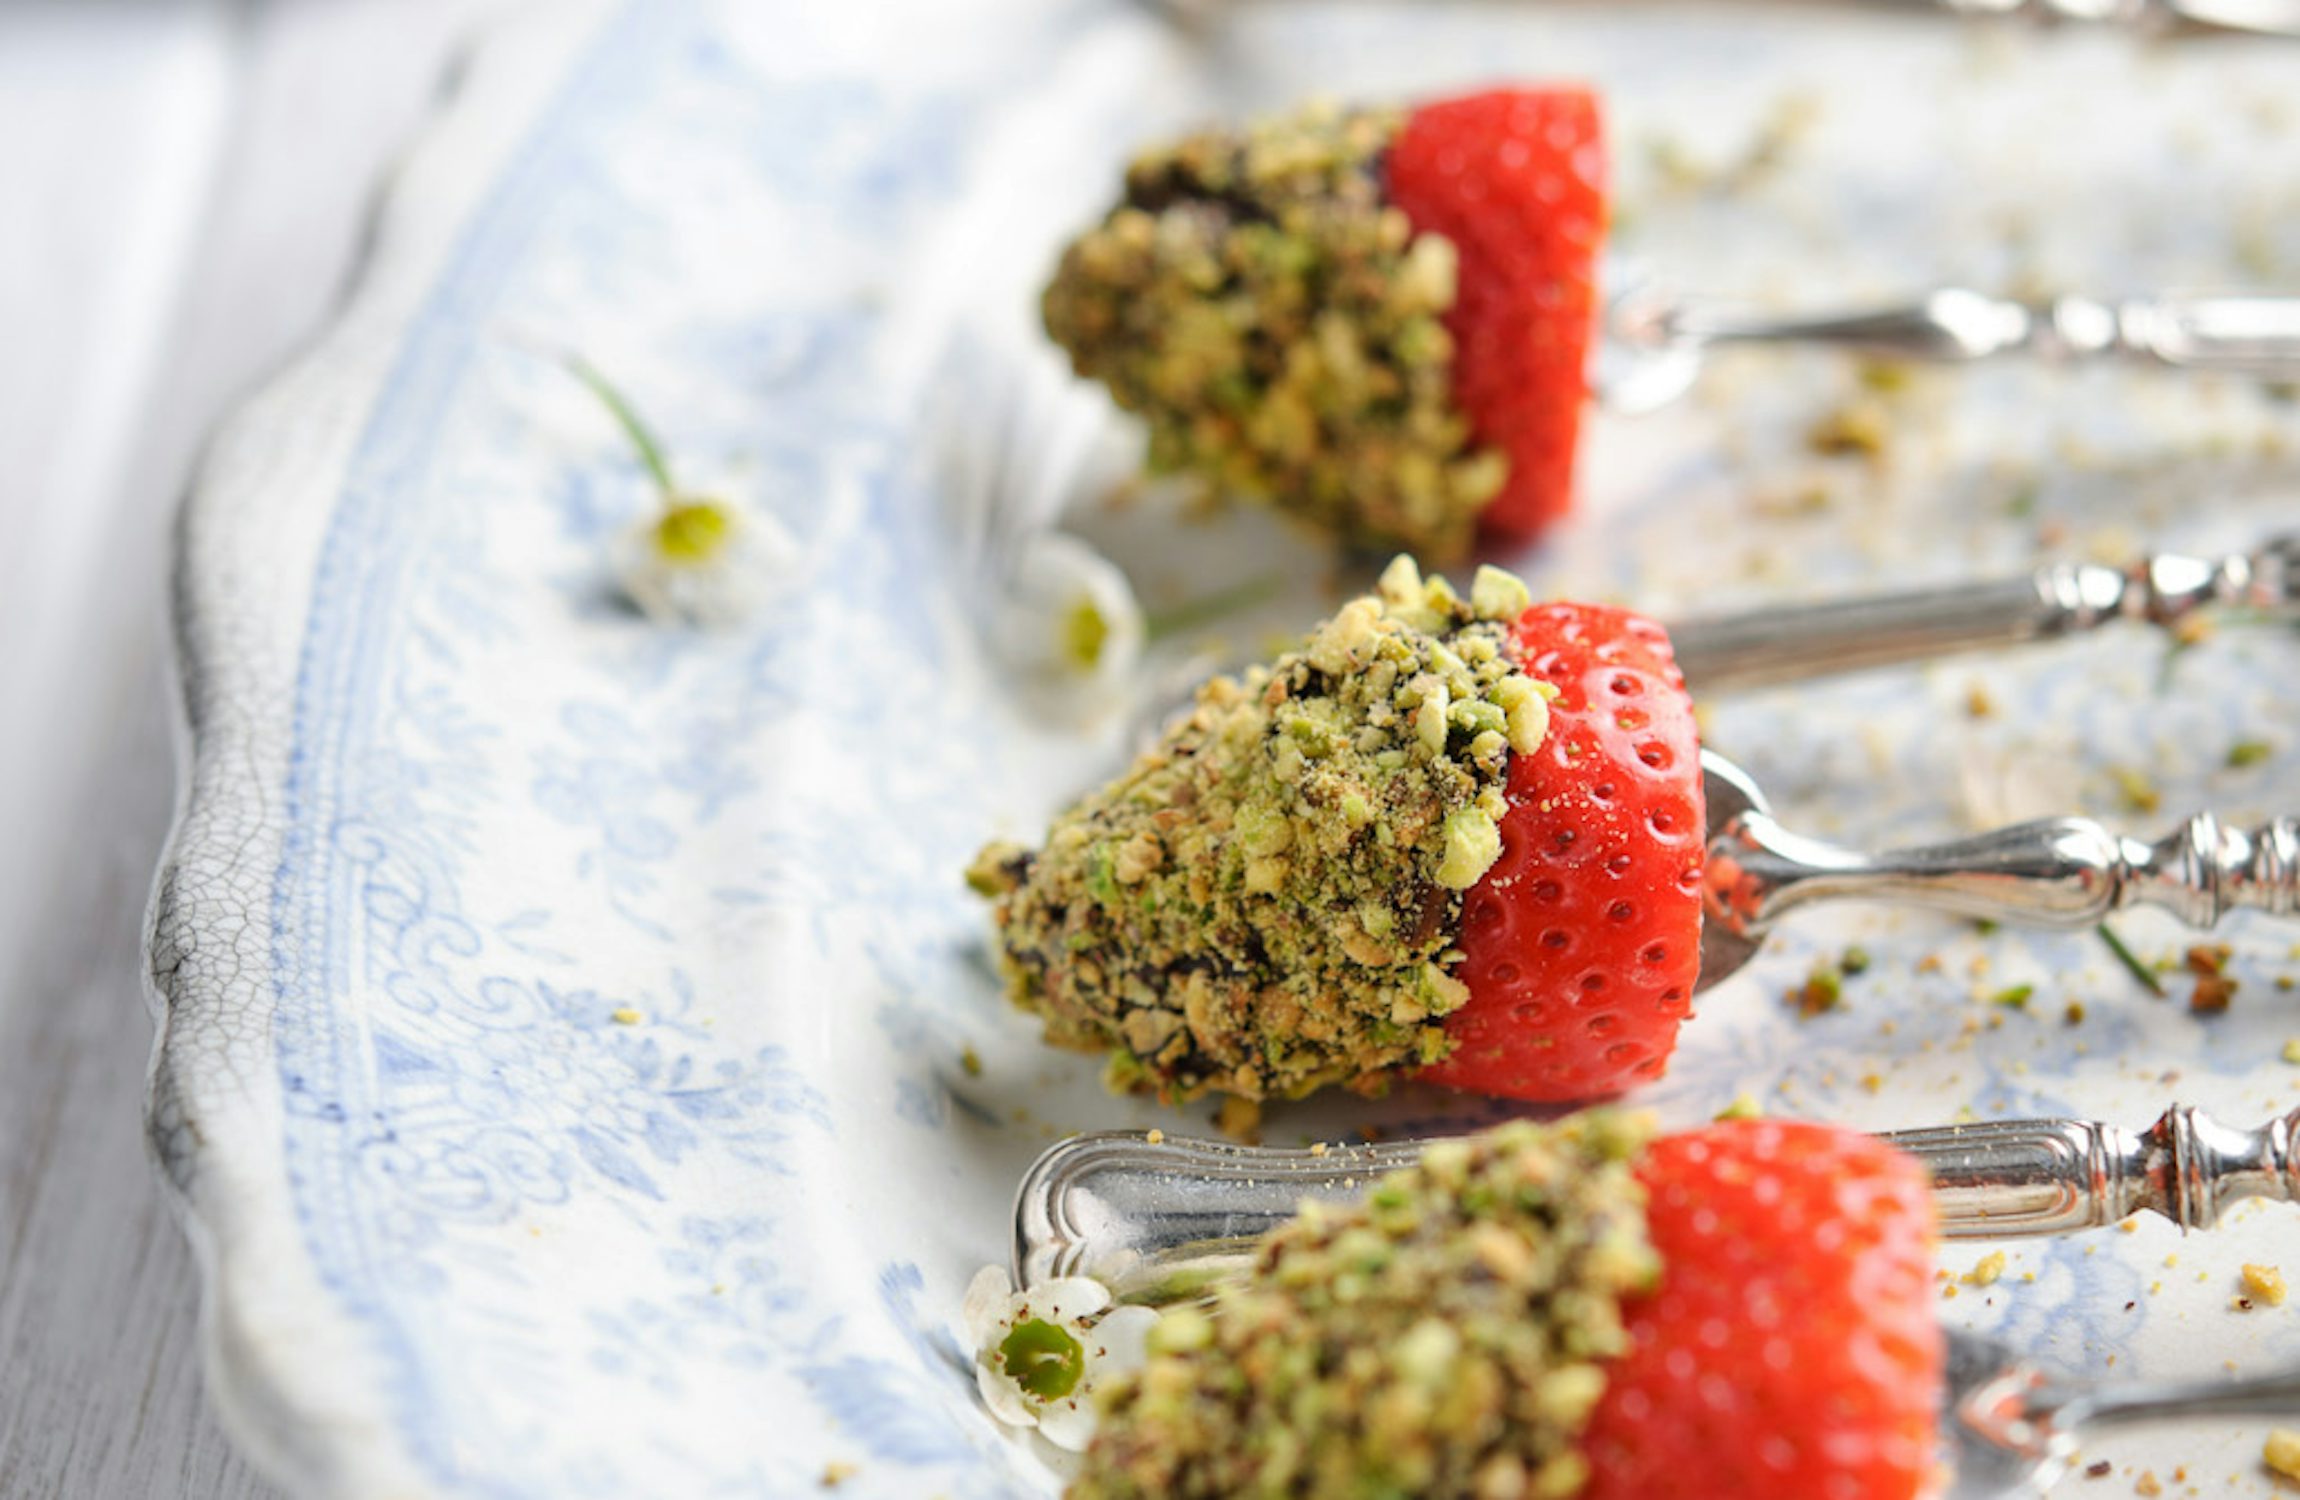 Chocolate Strawberries Dipped in Pistachios